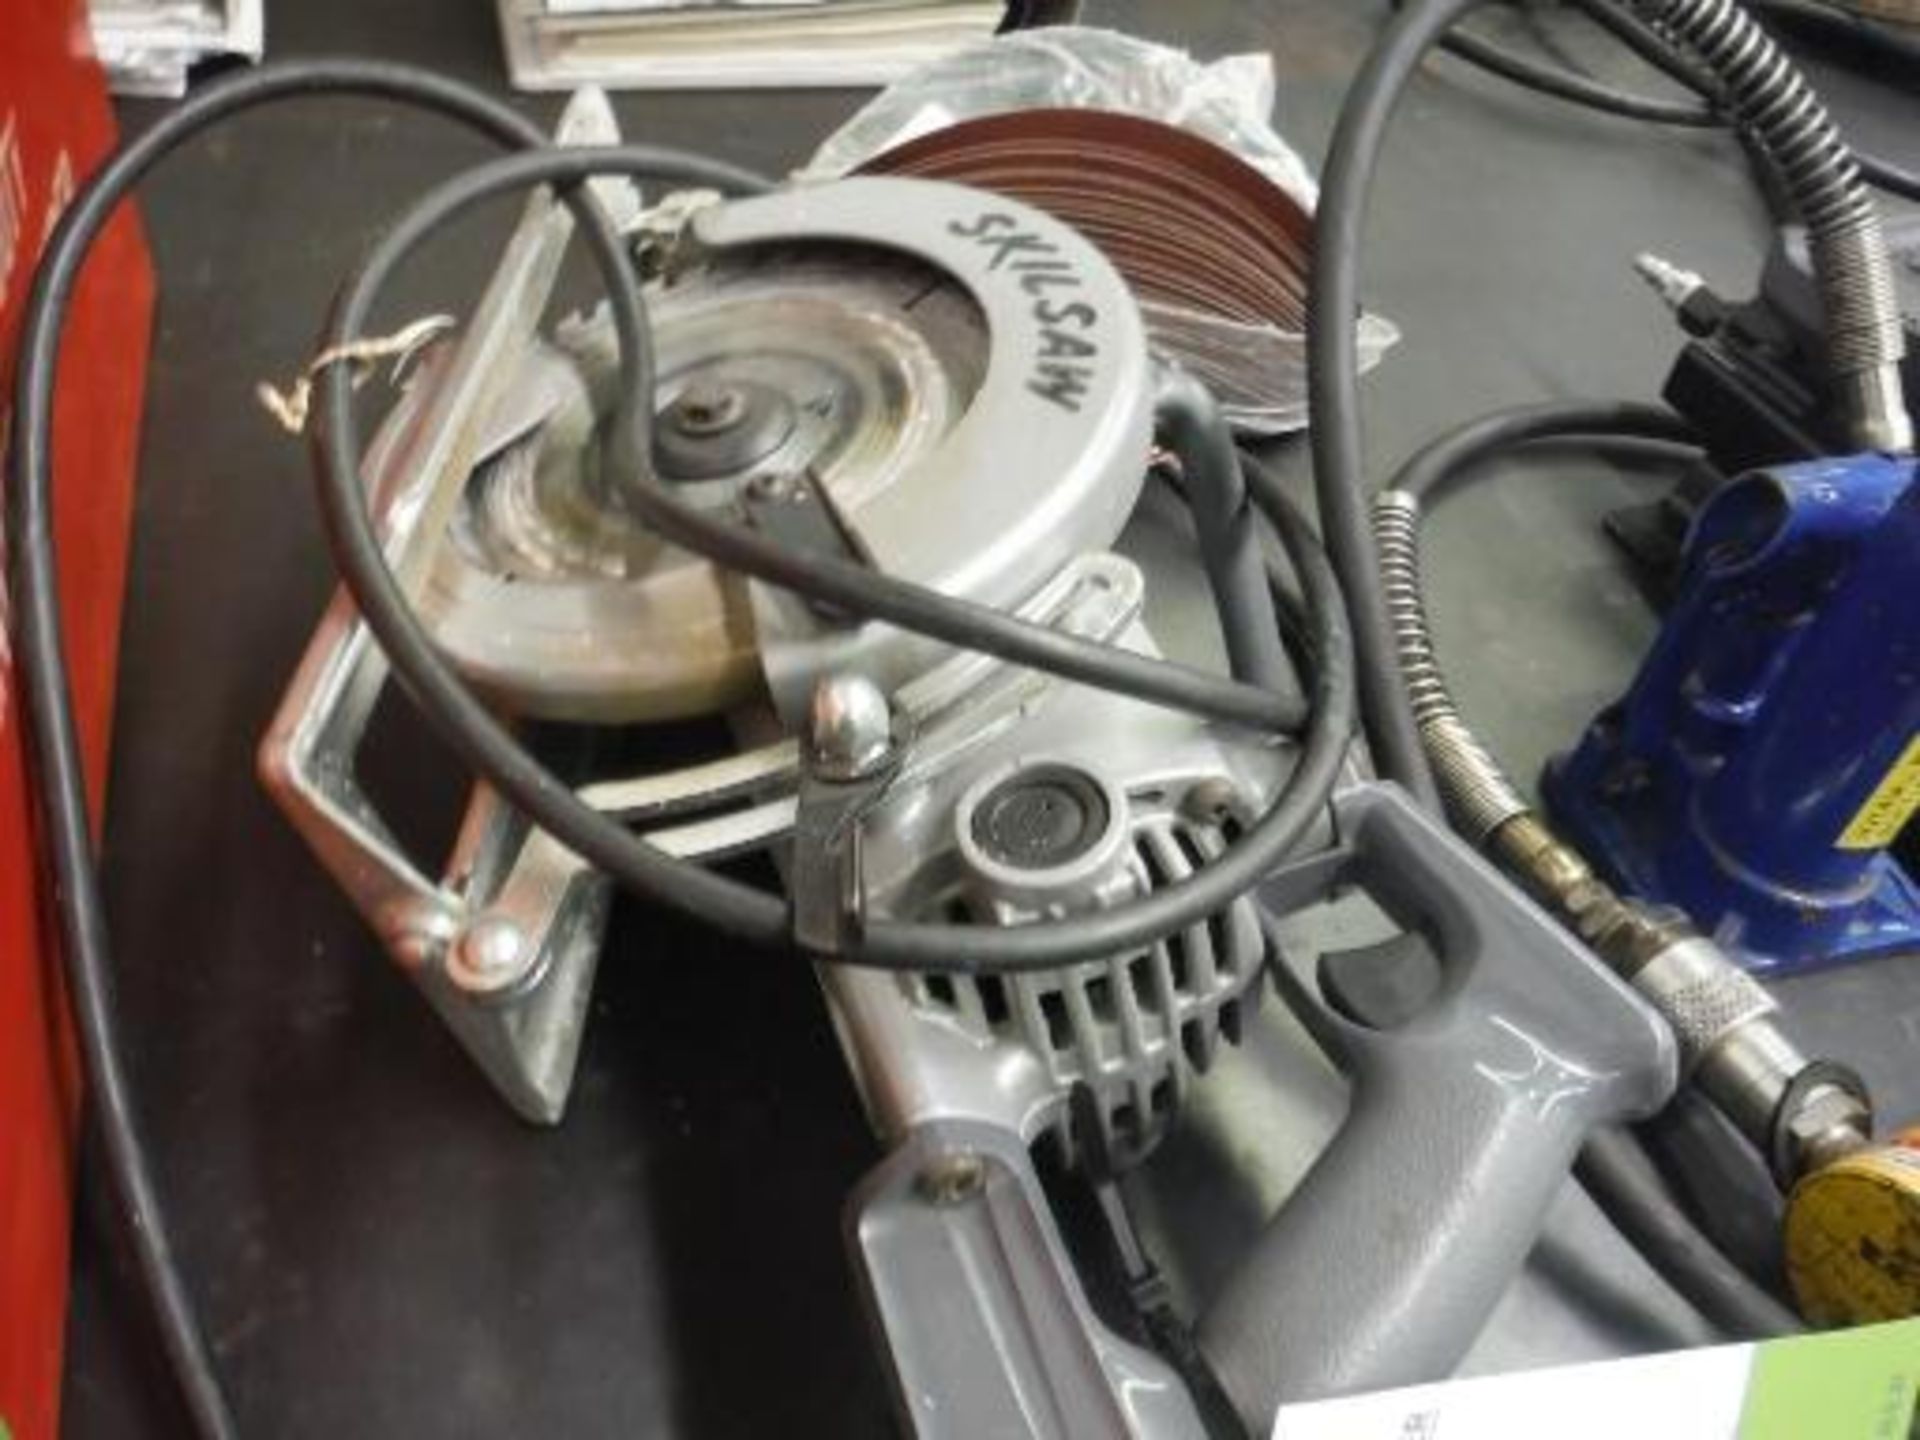 Skil circular saw 7 1/4 in. Located in Marion, Ohio Rigging Fee: $25